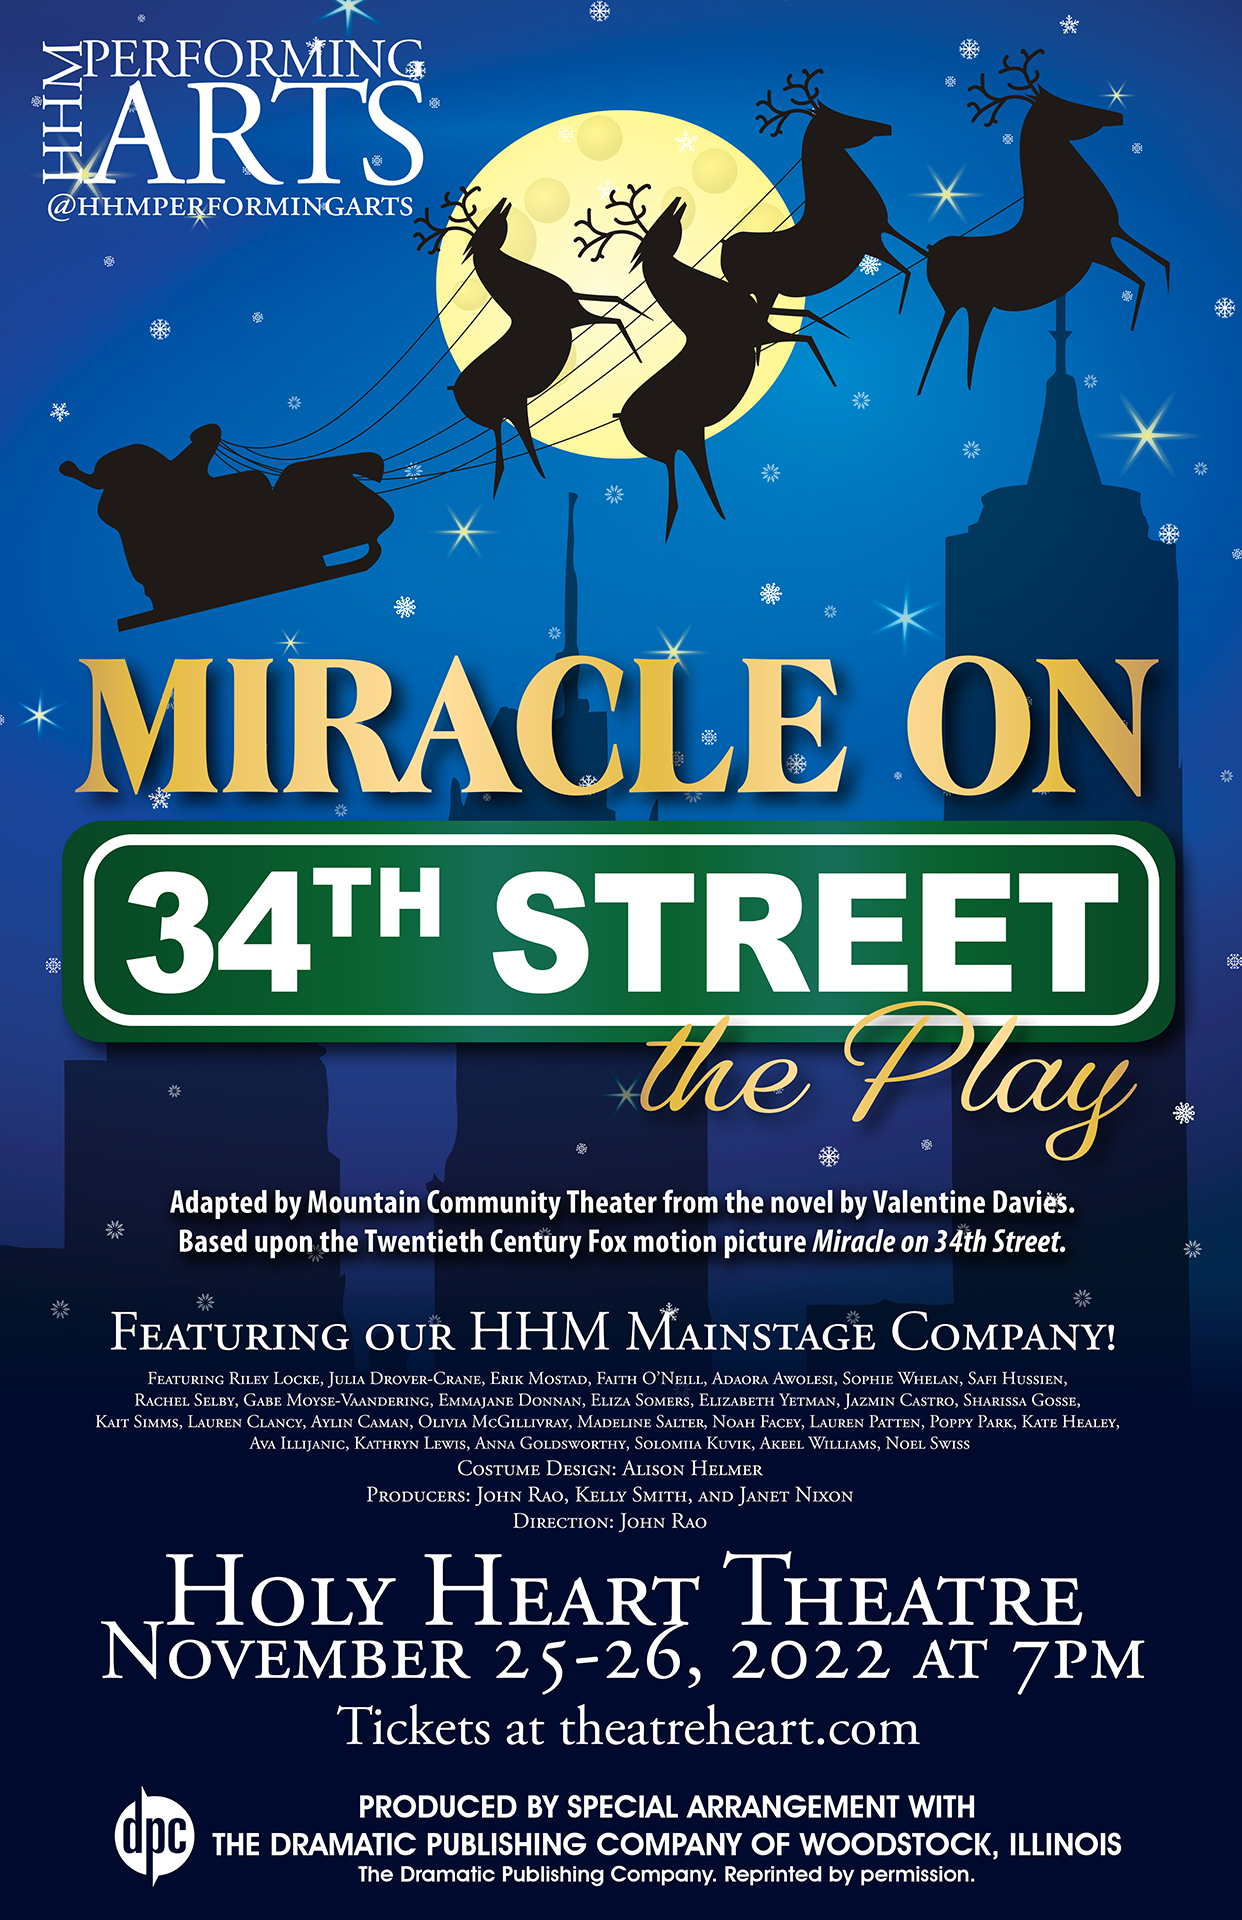 Miracle on 34th Street!